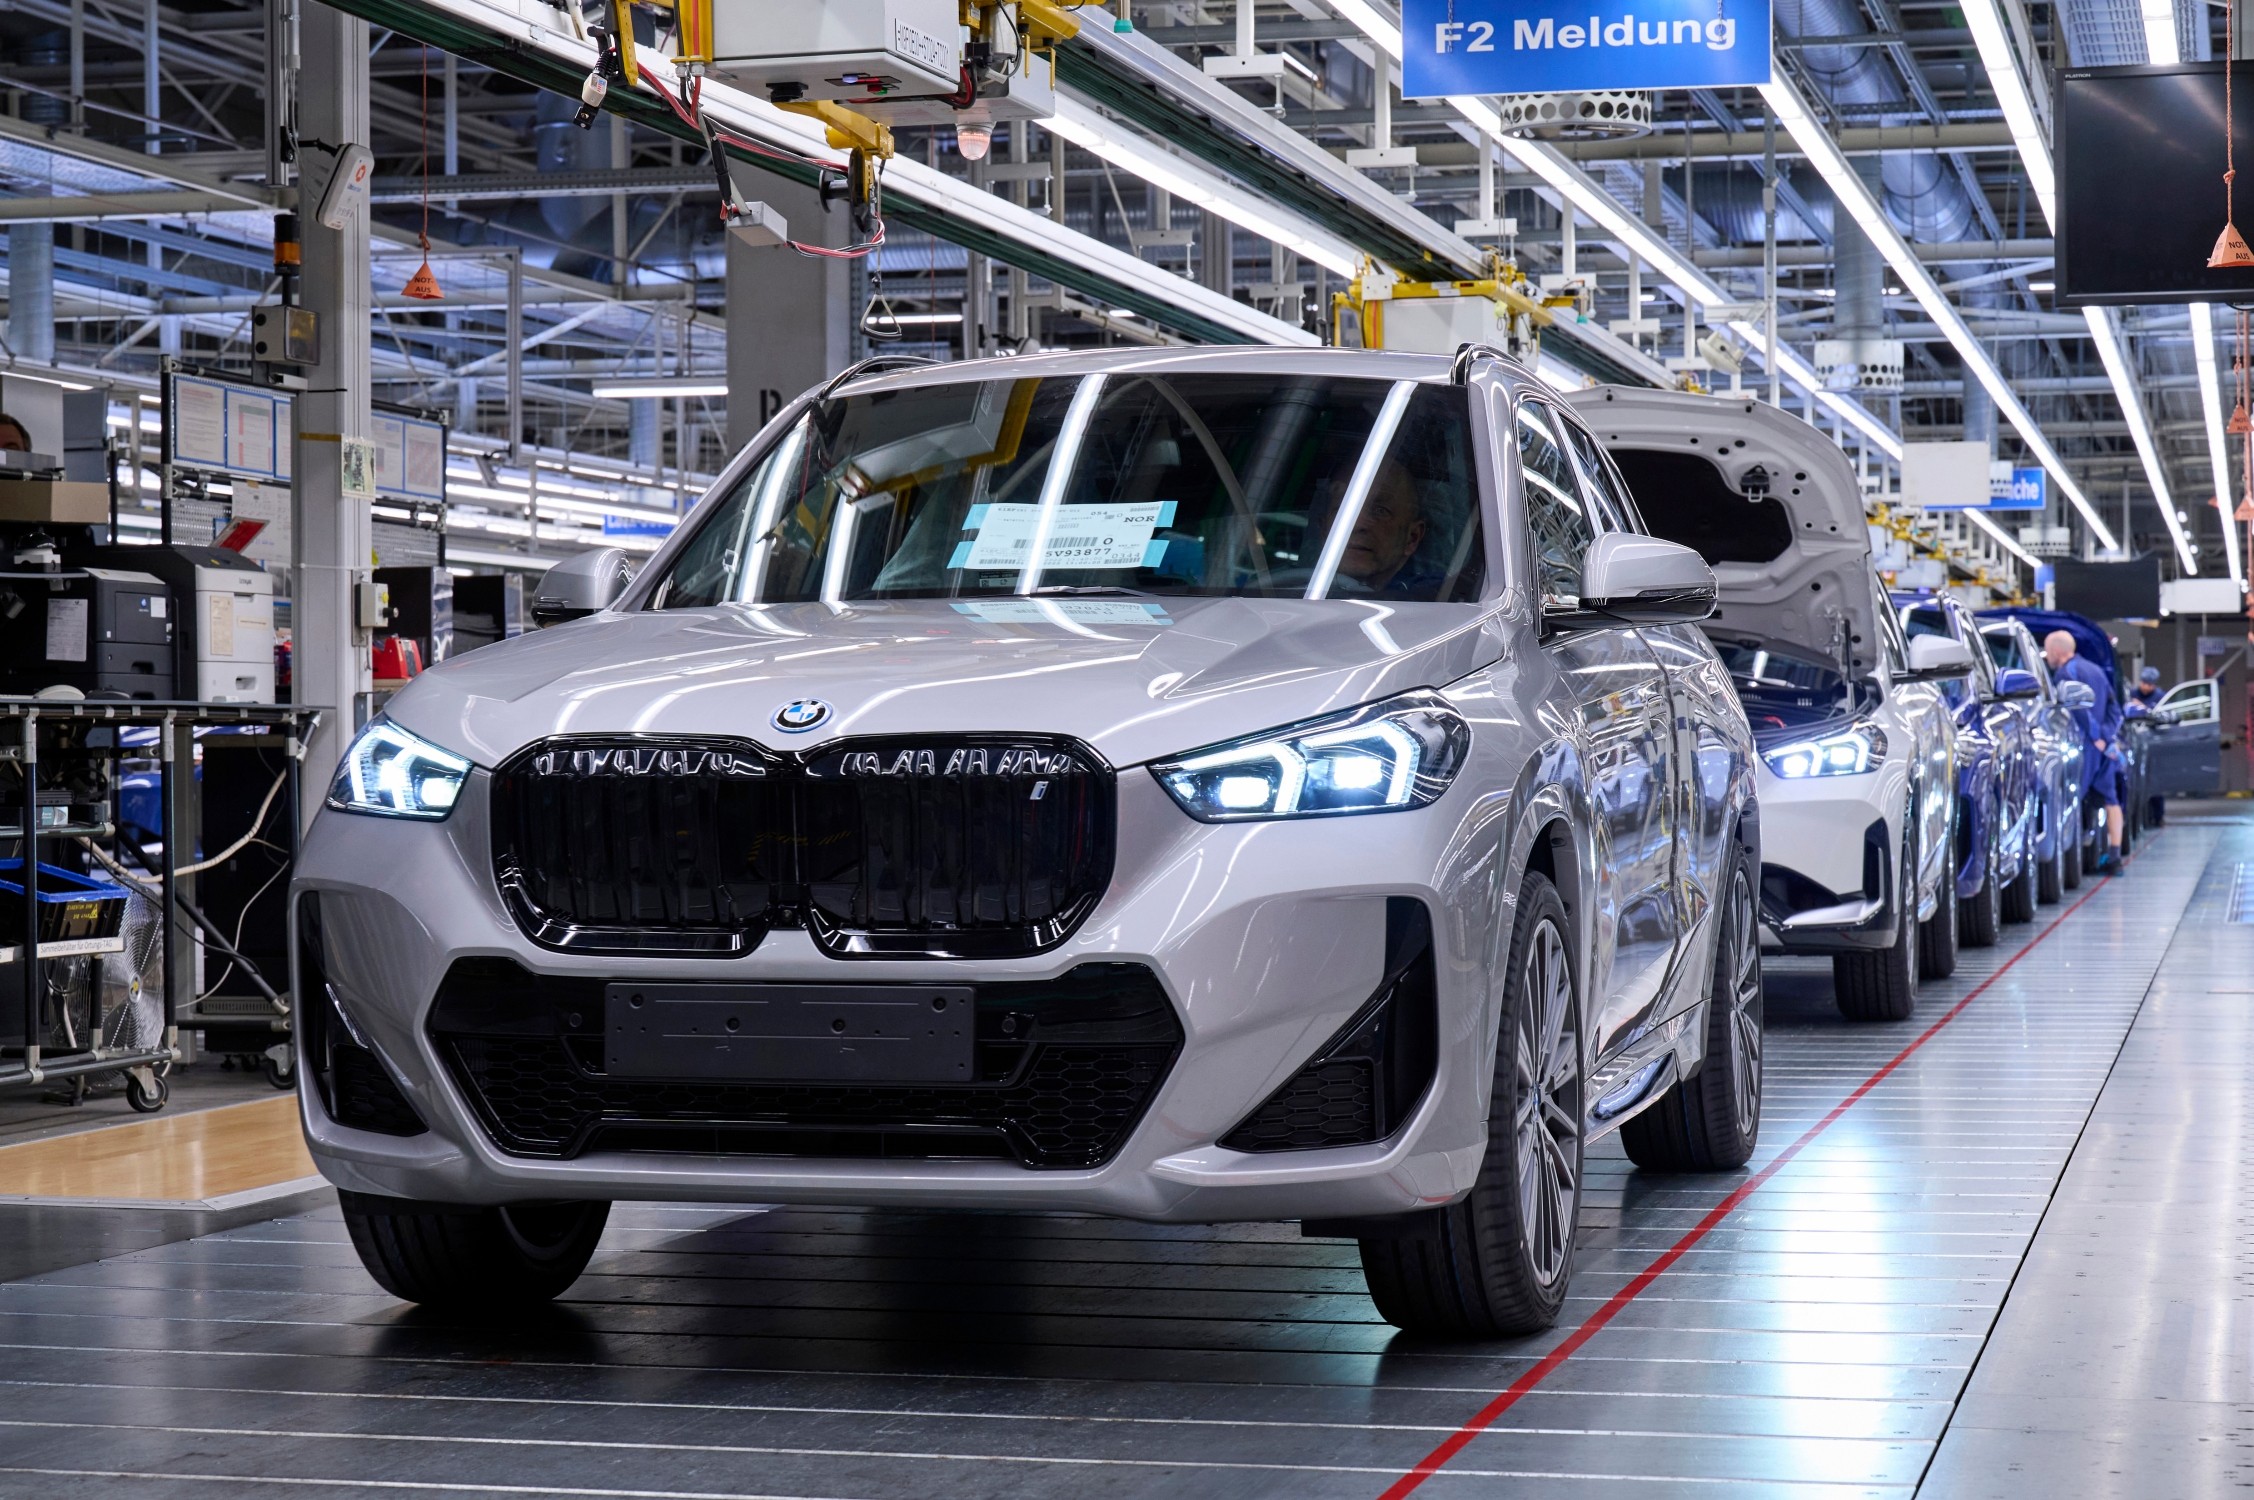 BMW wants humanoid robots to build its cars